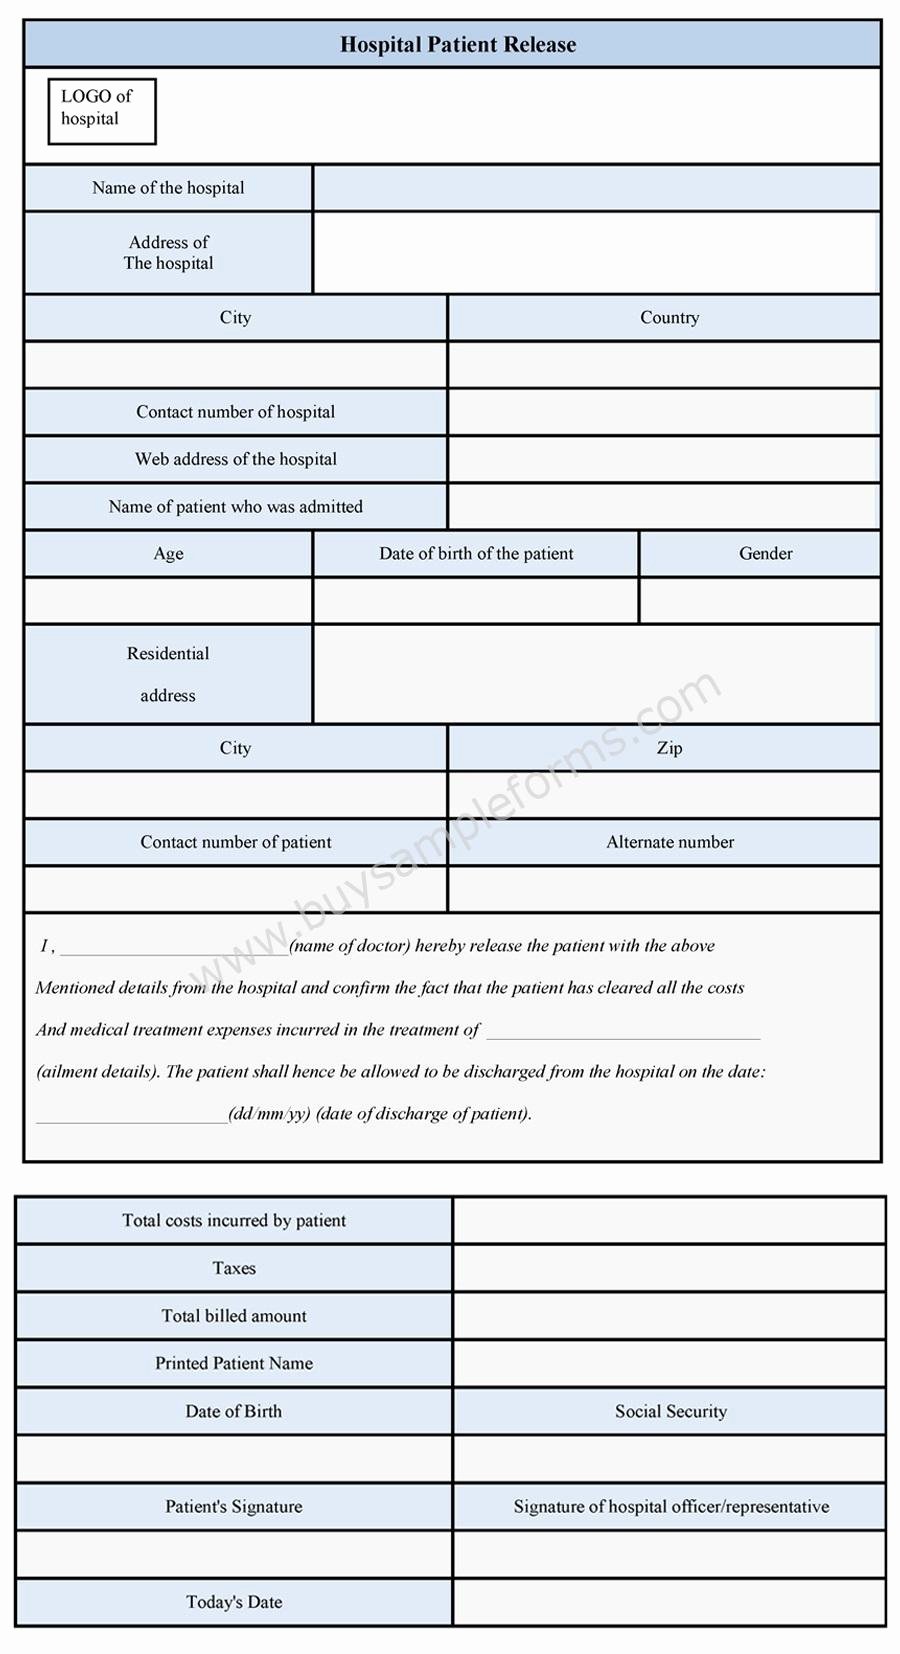 Hospital Discharge form Template Luxury Hospital Patient Release form Sample forms